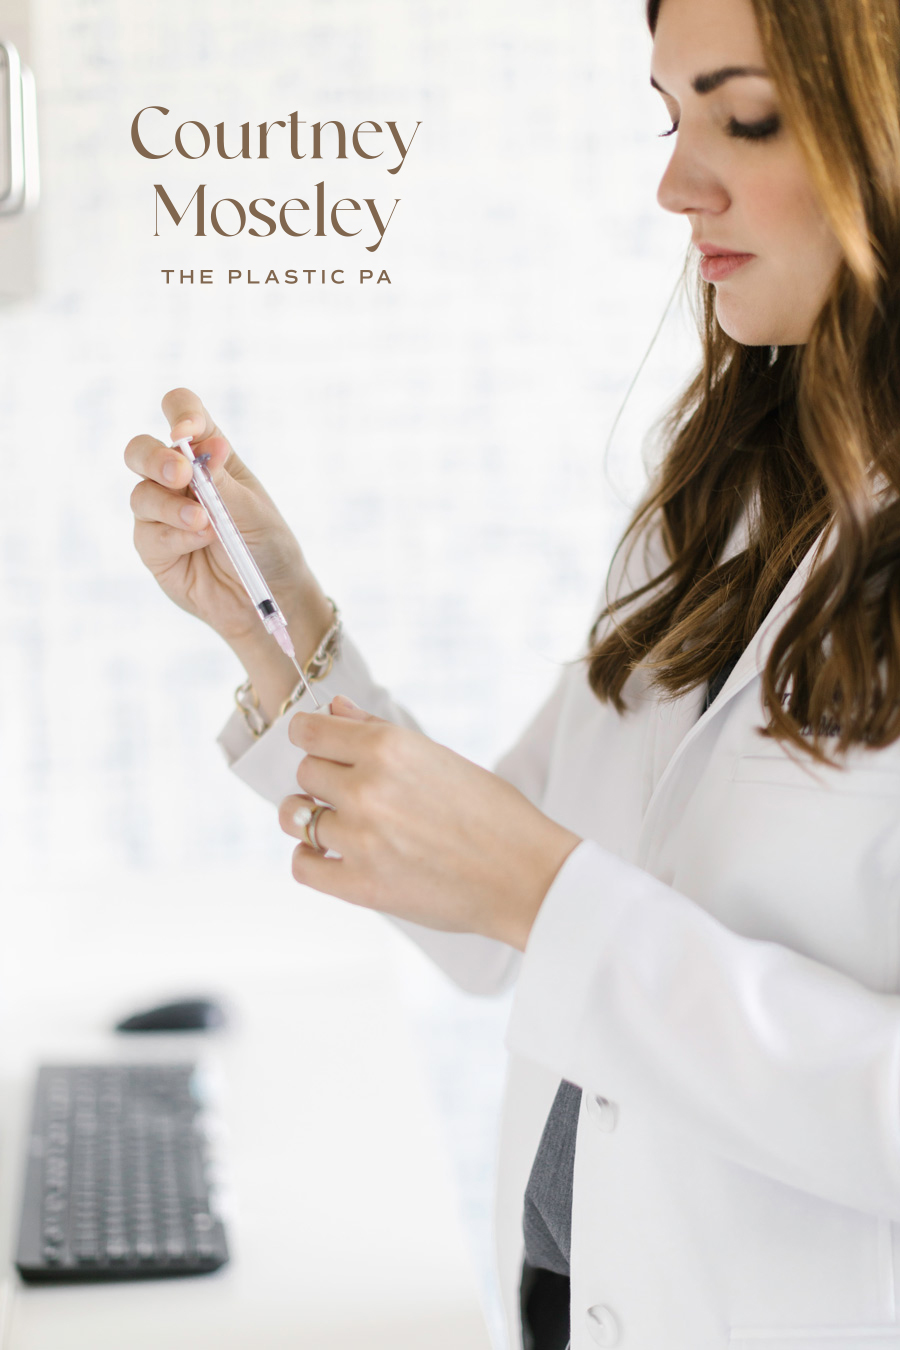 physician associate filling syringe with logo superimposed on the picture